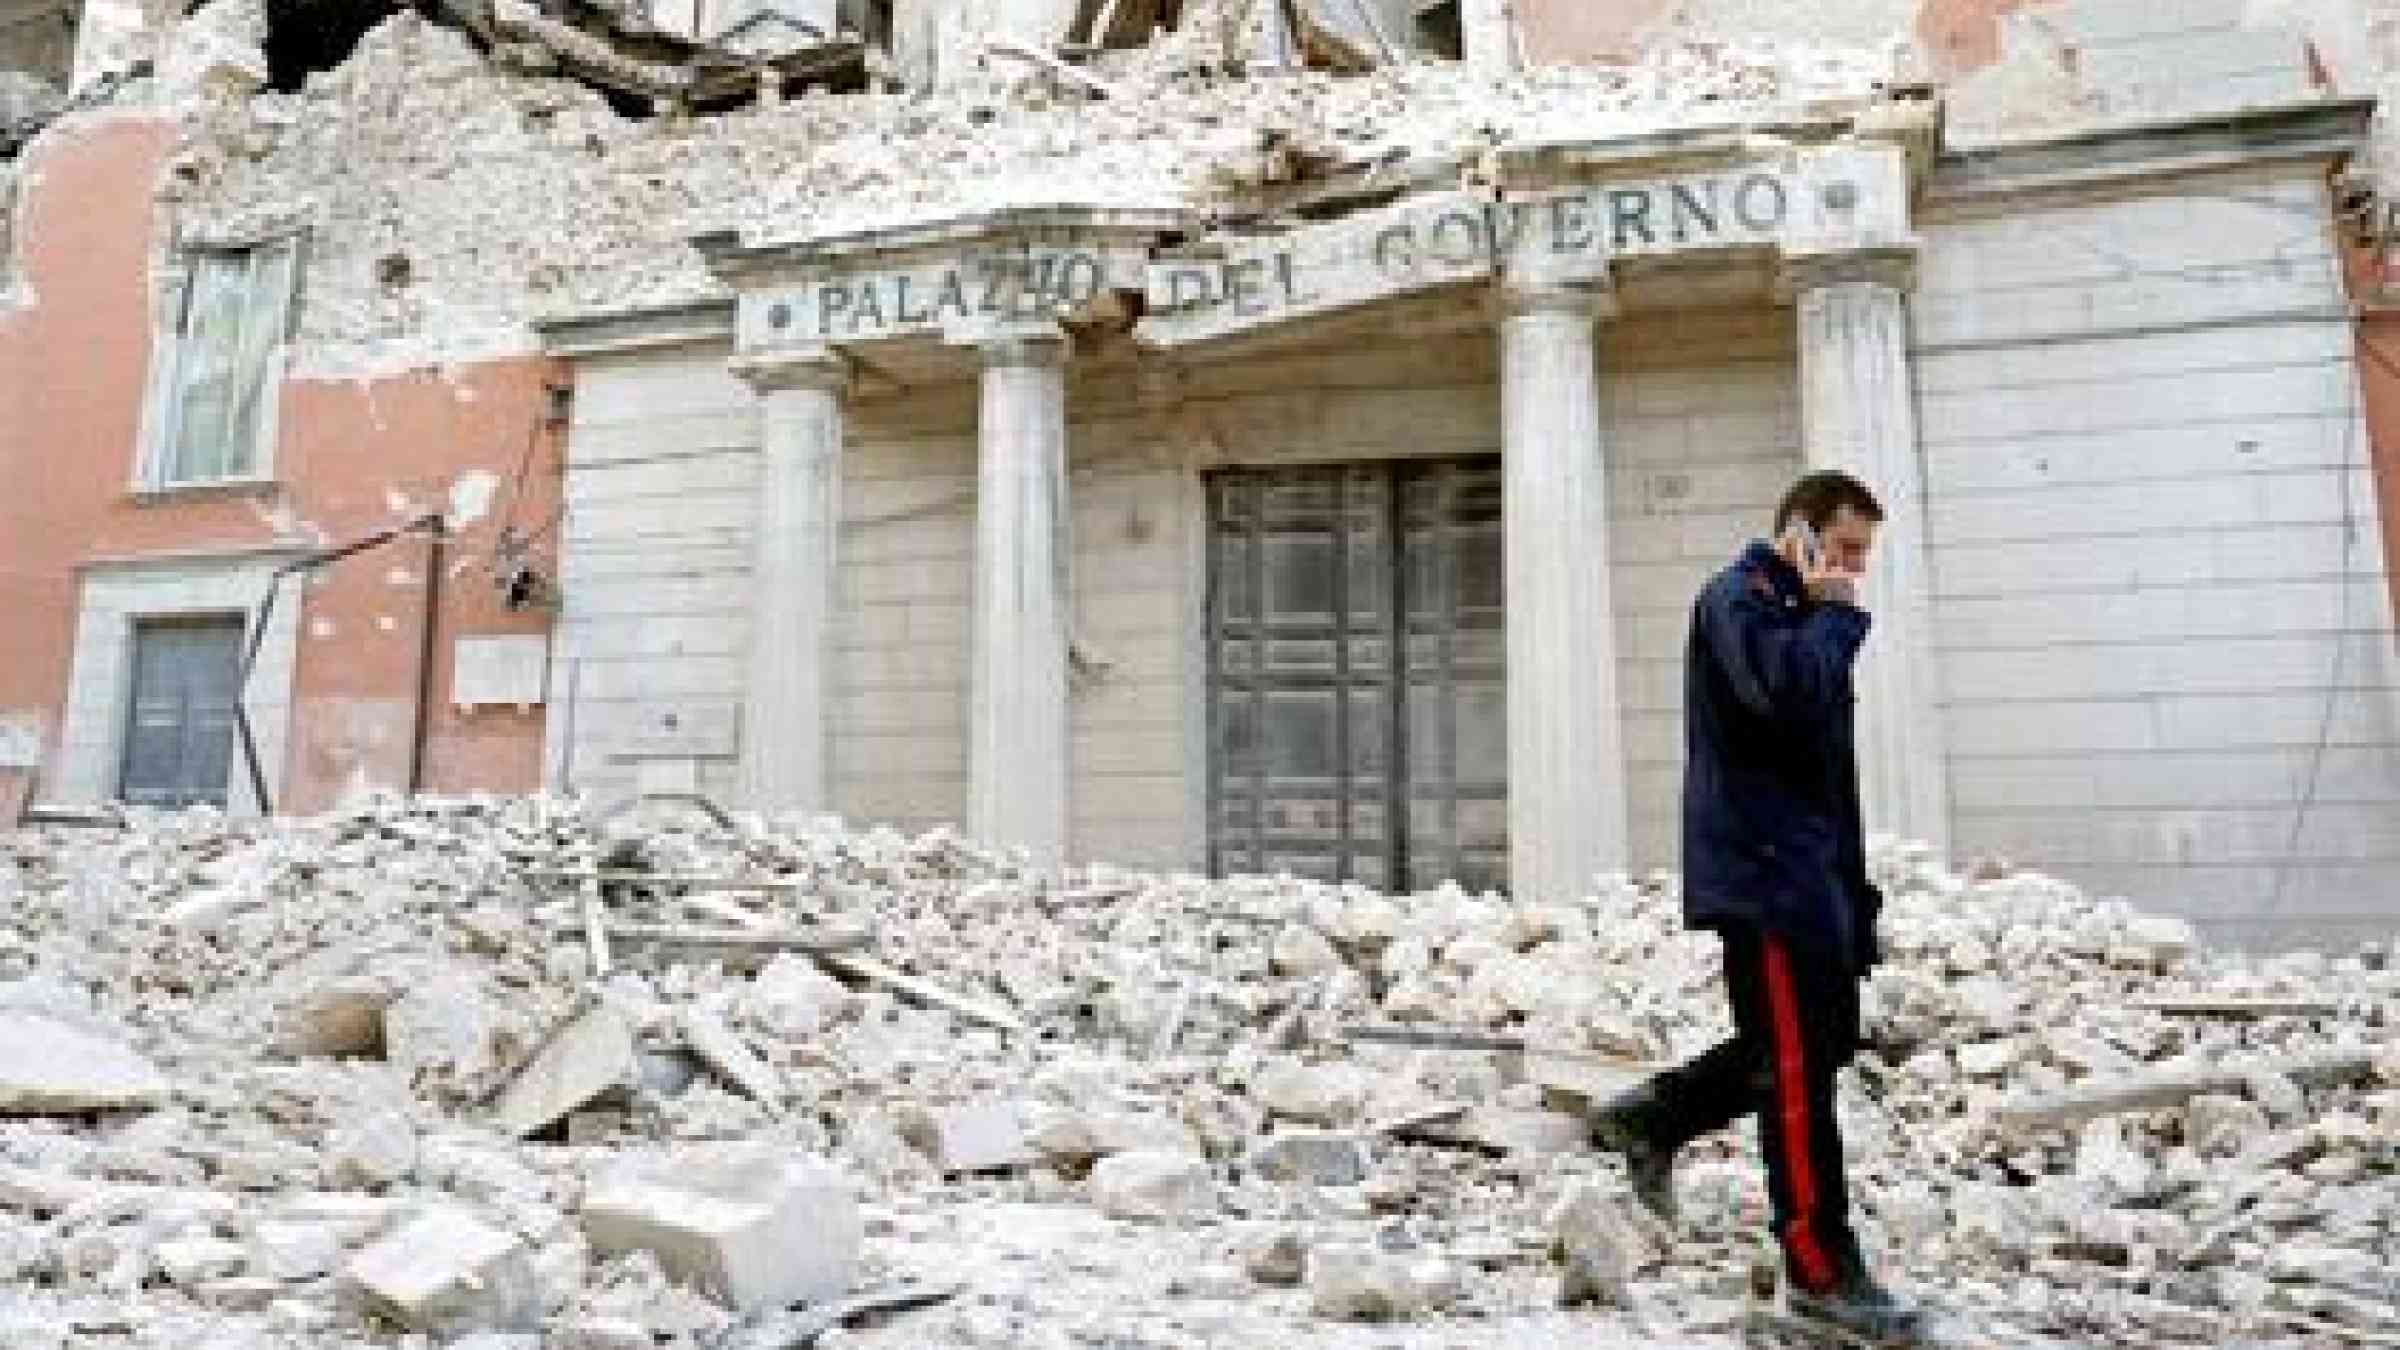 An Italian military carabinieri walks on debris past destroyed buildings after an earthquake, in downtown Aquila April 6, 2009. (REUTERS/Alessandro Bianchi)